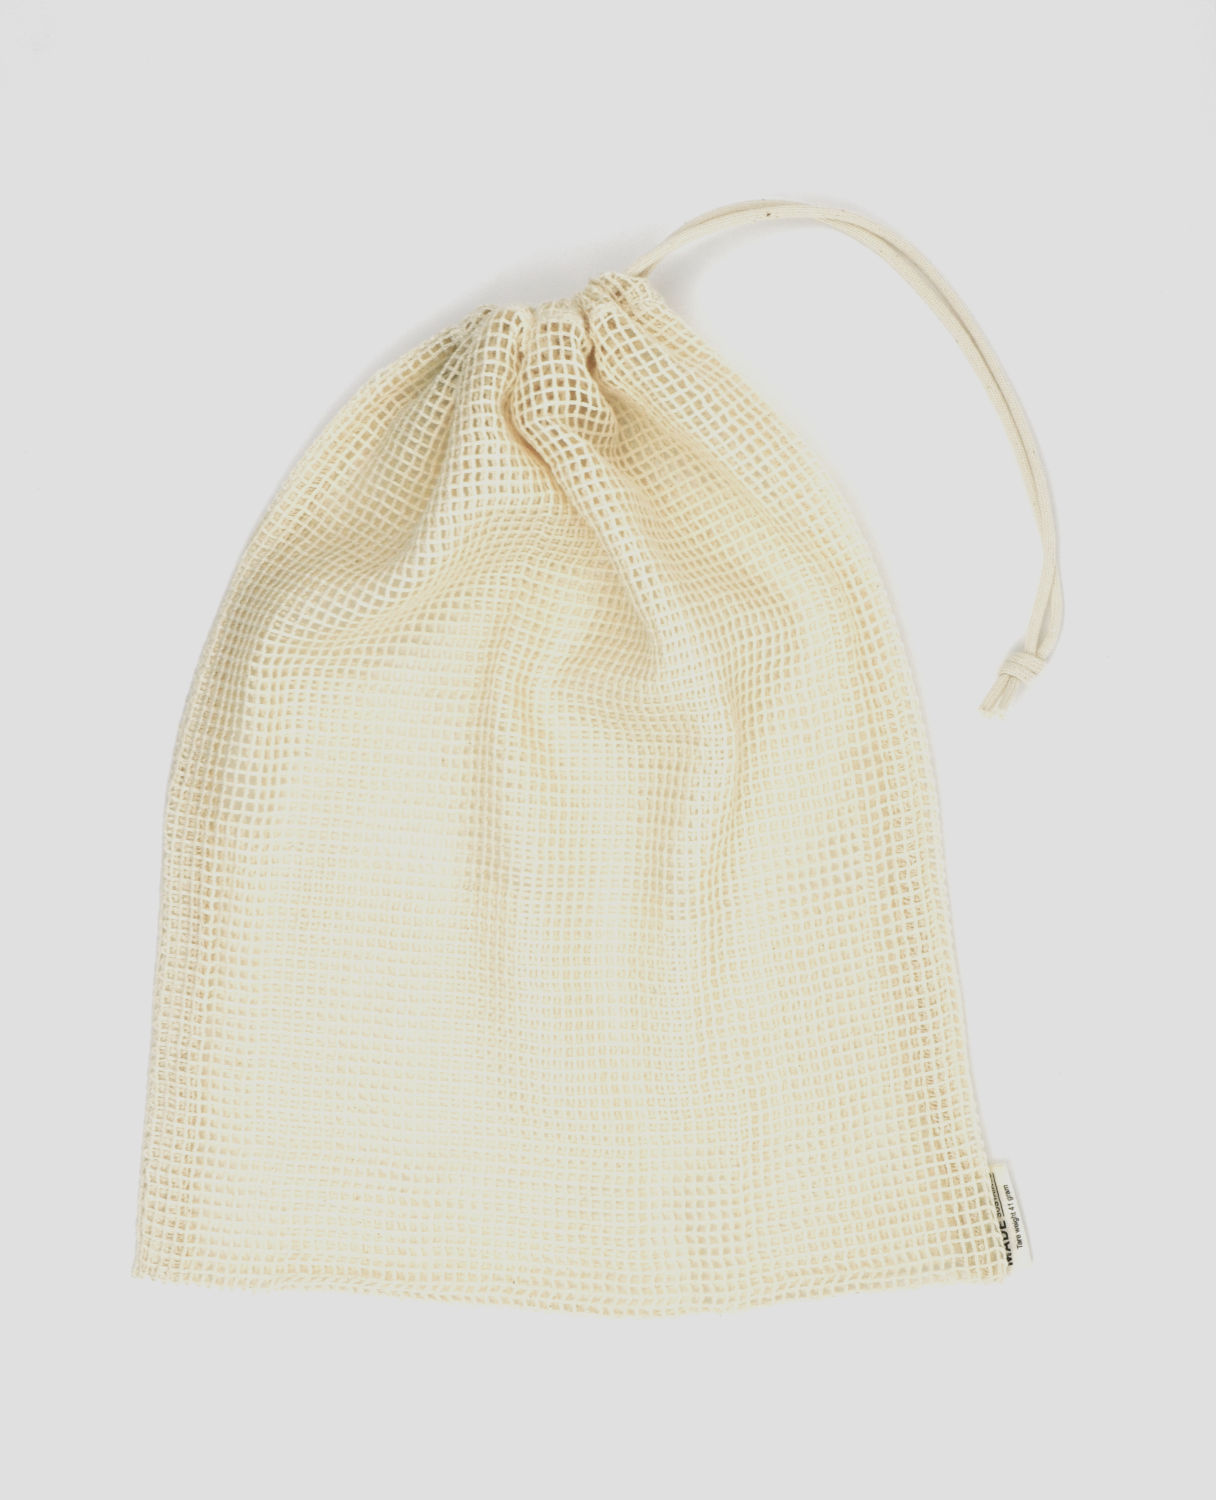 Re-Sack - Organic Cotton Fruit and Vegetable Net